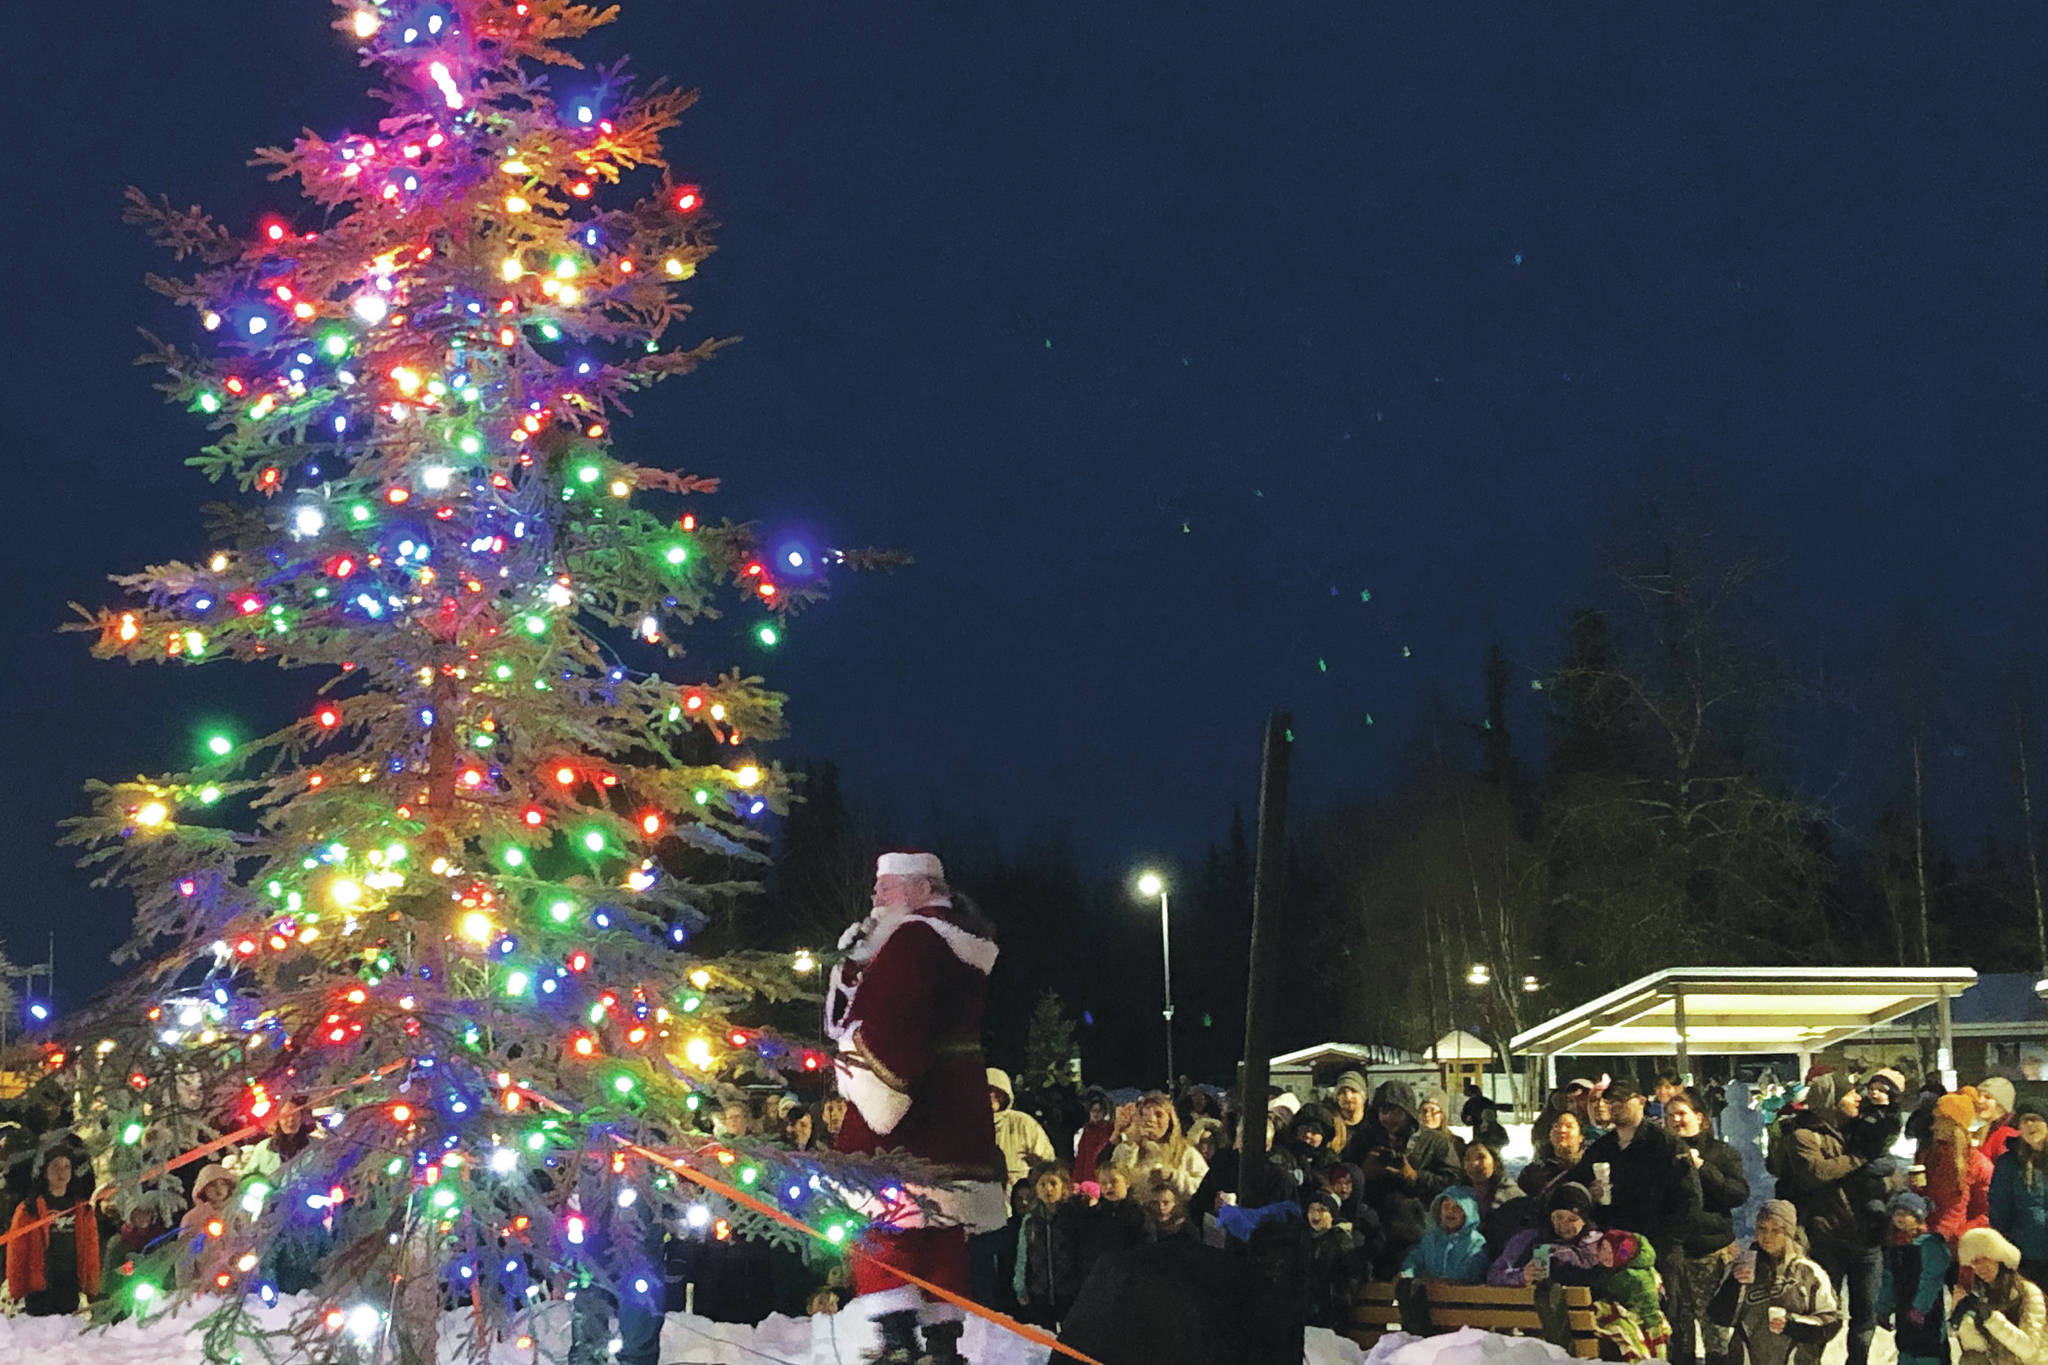 Santa Claus lights up the Christmas tree in front of an audience Saturday, Dec. 7, 2019, at the Christmas in the Park Celebration at Soldotna Creek Park in Soldotna, Alaska. (Photo by Joey Klecka/Peninsula Clarion)